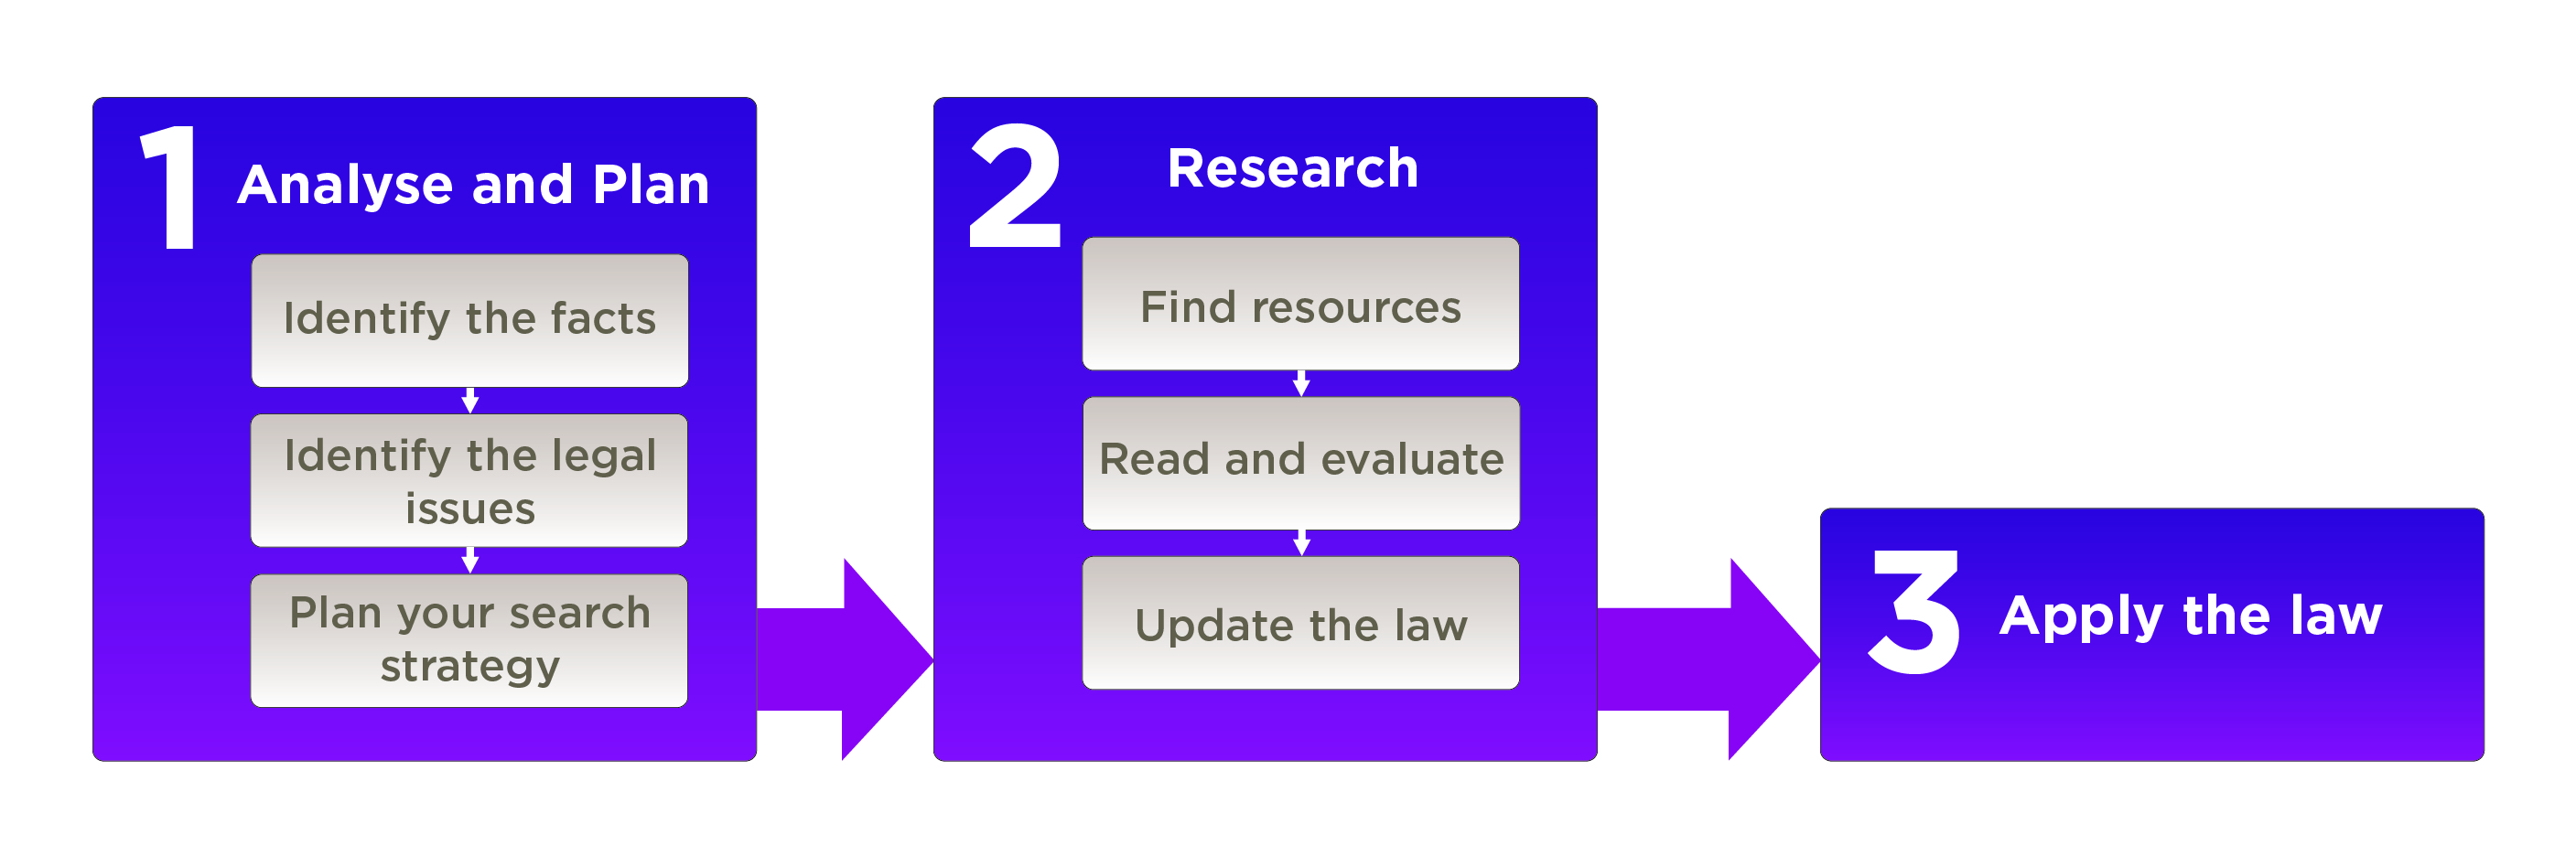 legal research projects